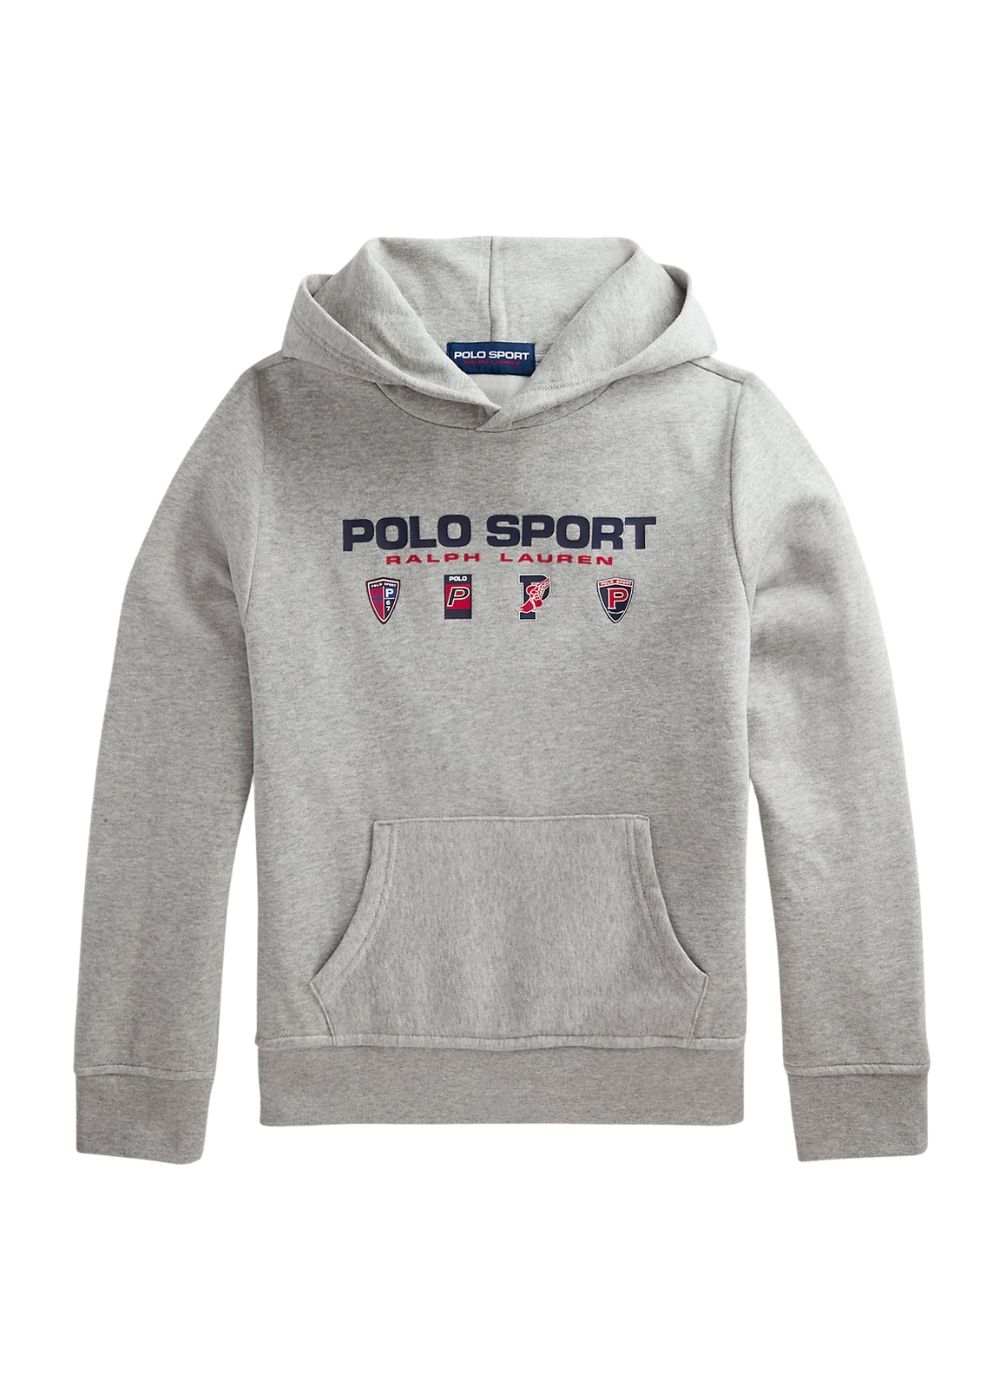 Featured image for “POLO RALPH LAUREN FELPA POLO SPORT P-WING”